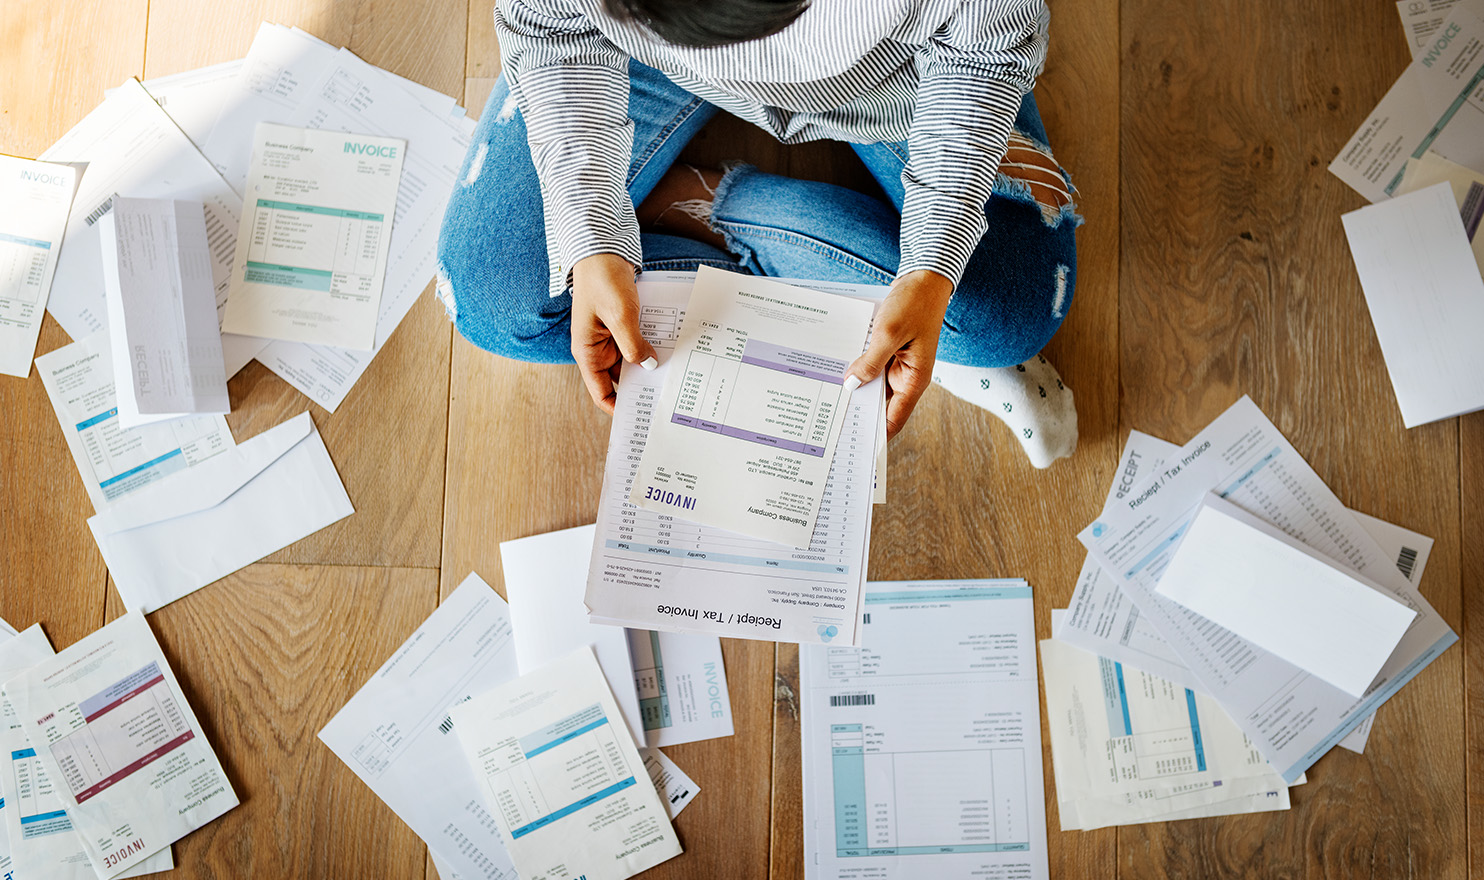 A person is sitting on the floor surrounded by receipts and business documents to use for a quote for product liability insurance.